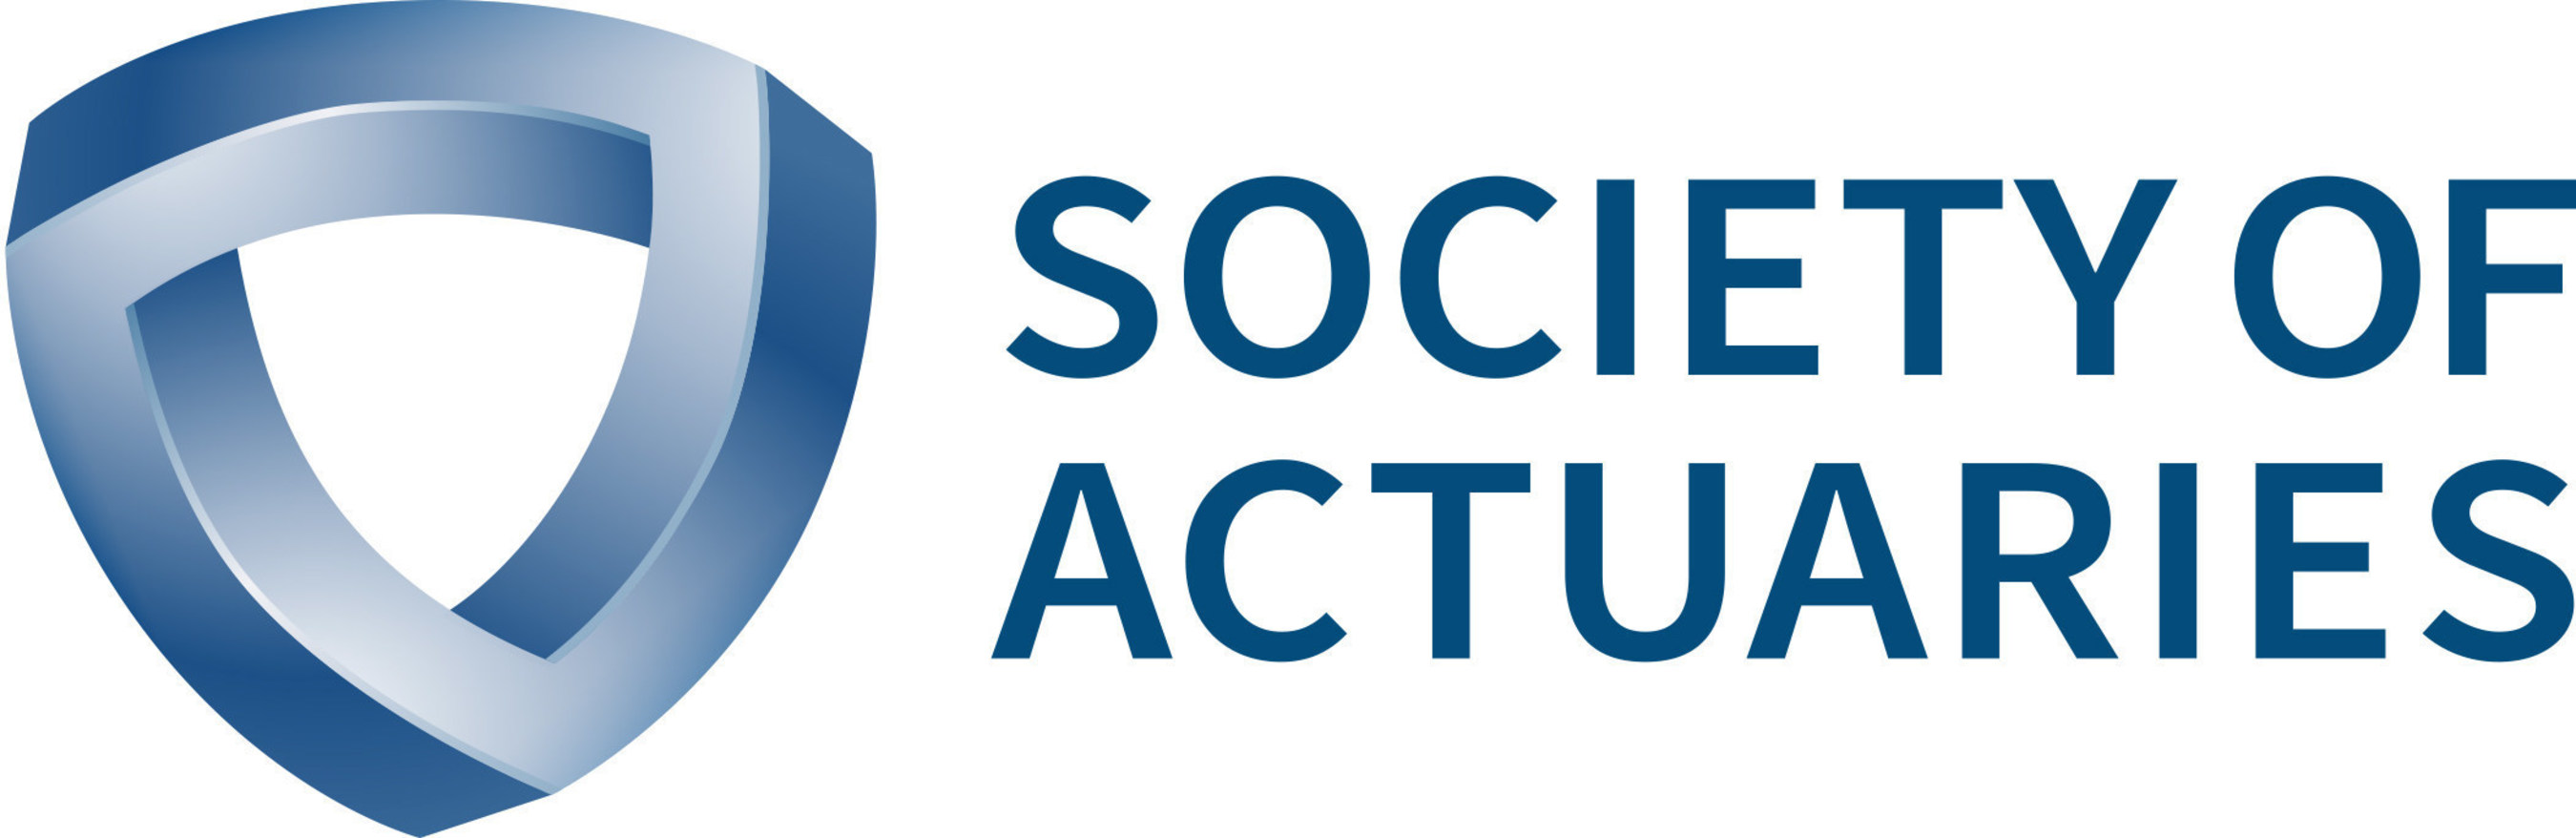 Society Of Actuaries Launches Refreshed Brand